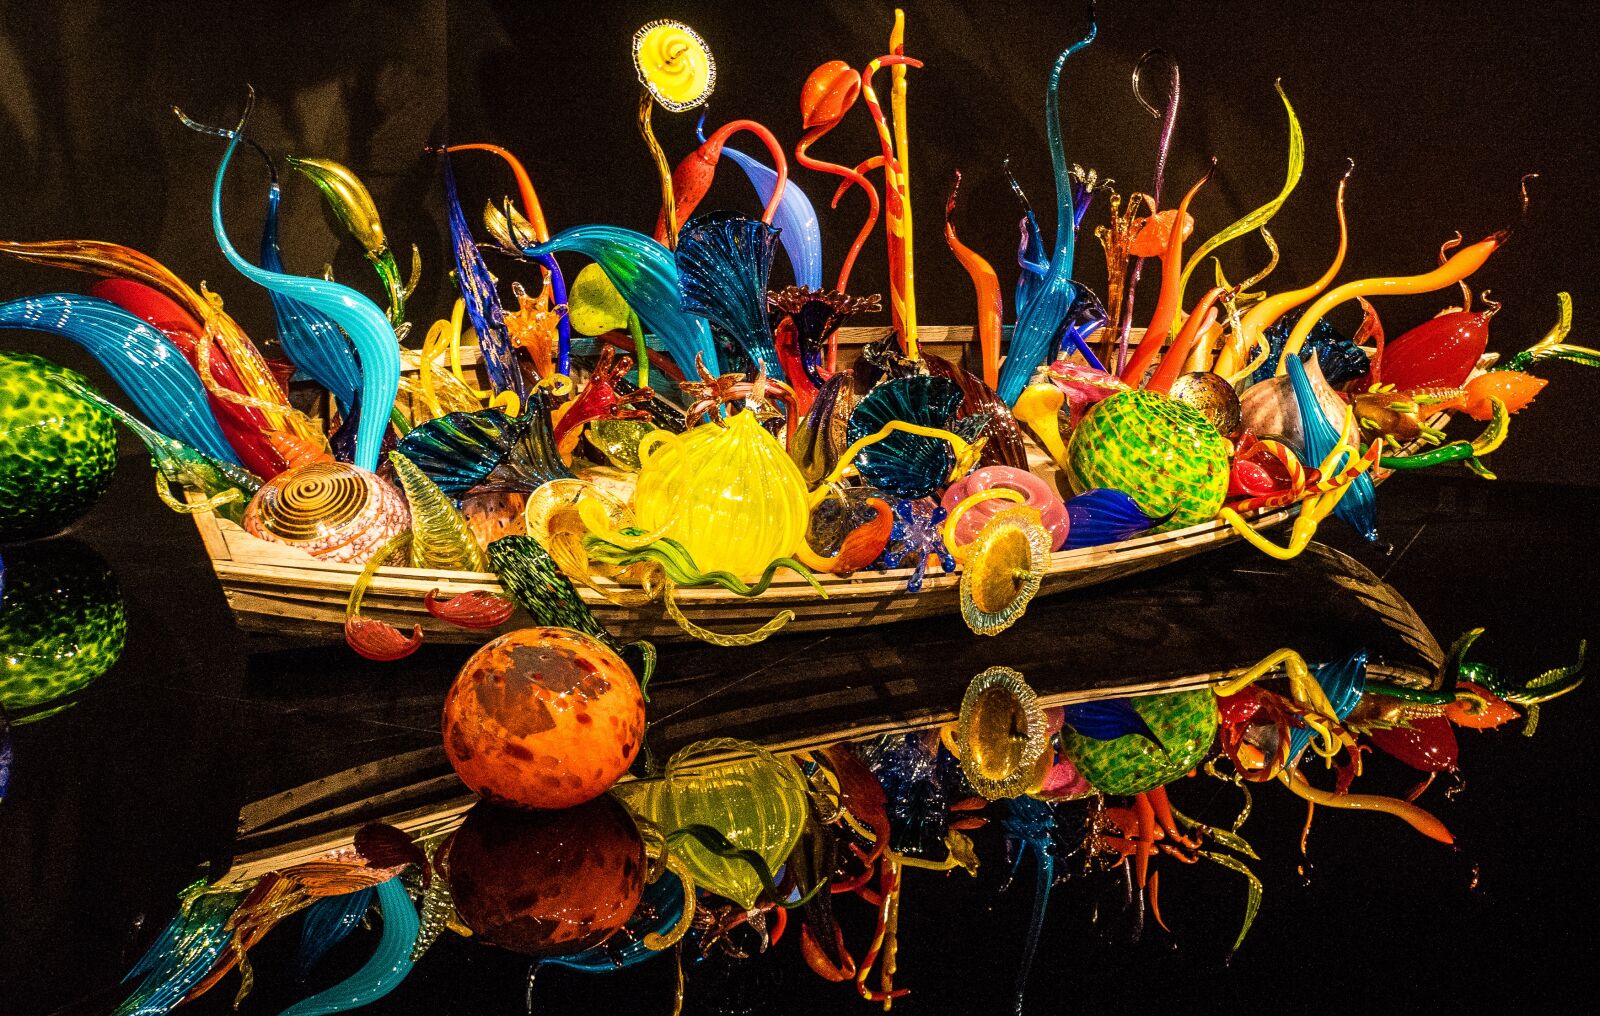 Sony a7 sample photo. Chihuly, glass, tourism photography